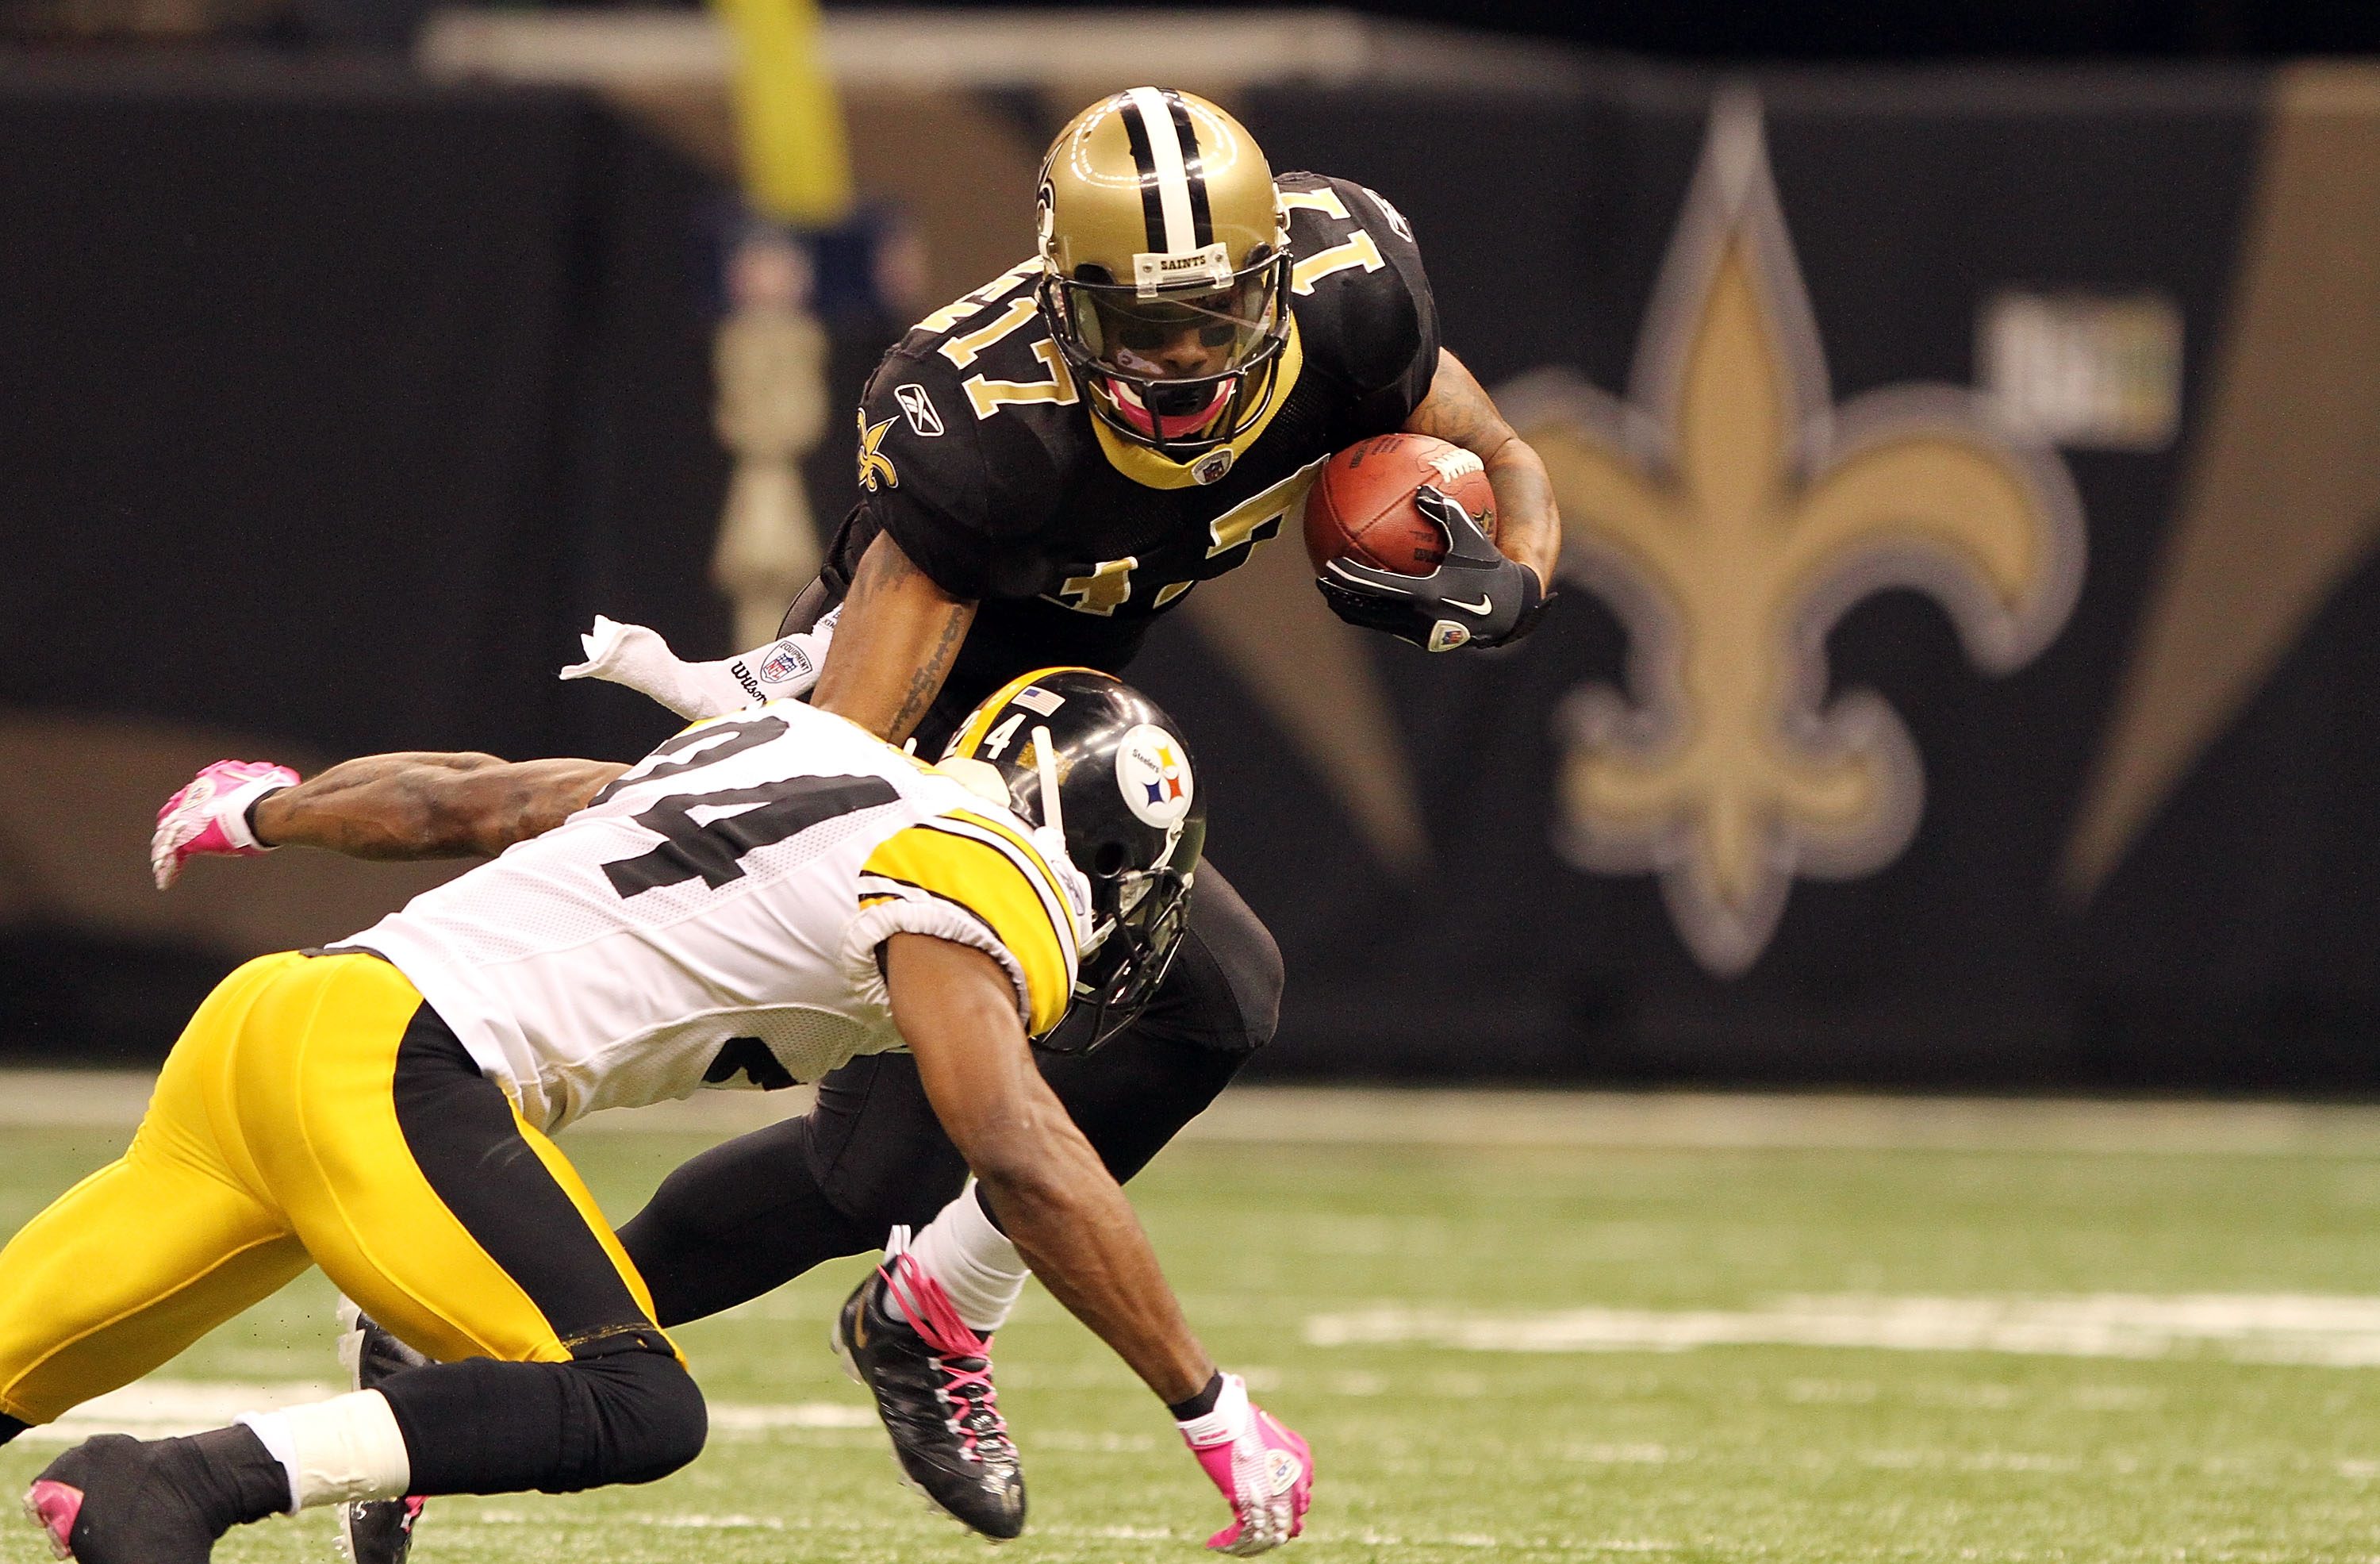 NEW ORLEANS, LA - OCTOBER 31: Robert Meachem #17 of the New Orleans Saints is tackled by Ike Taylor #24 of the Pittsburgh Steelers at the Louisiana Superdome on October 31, 2010 in New Orleans, Louisiana. (Photo by Matthew Sharpe/Getty Images)